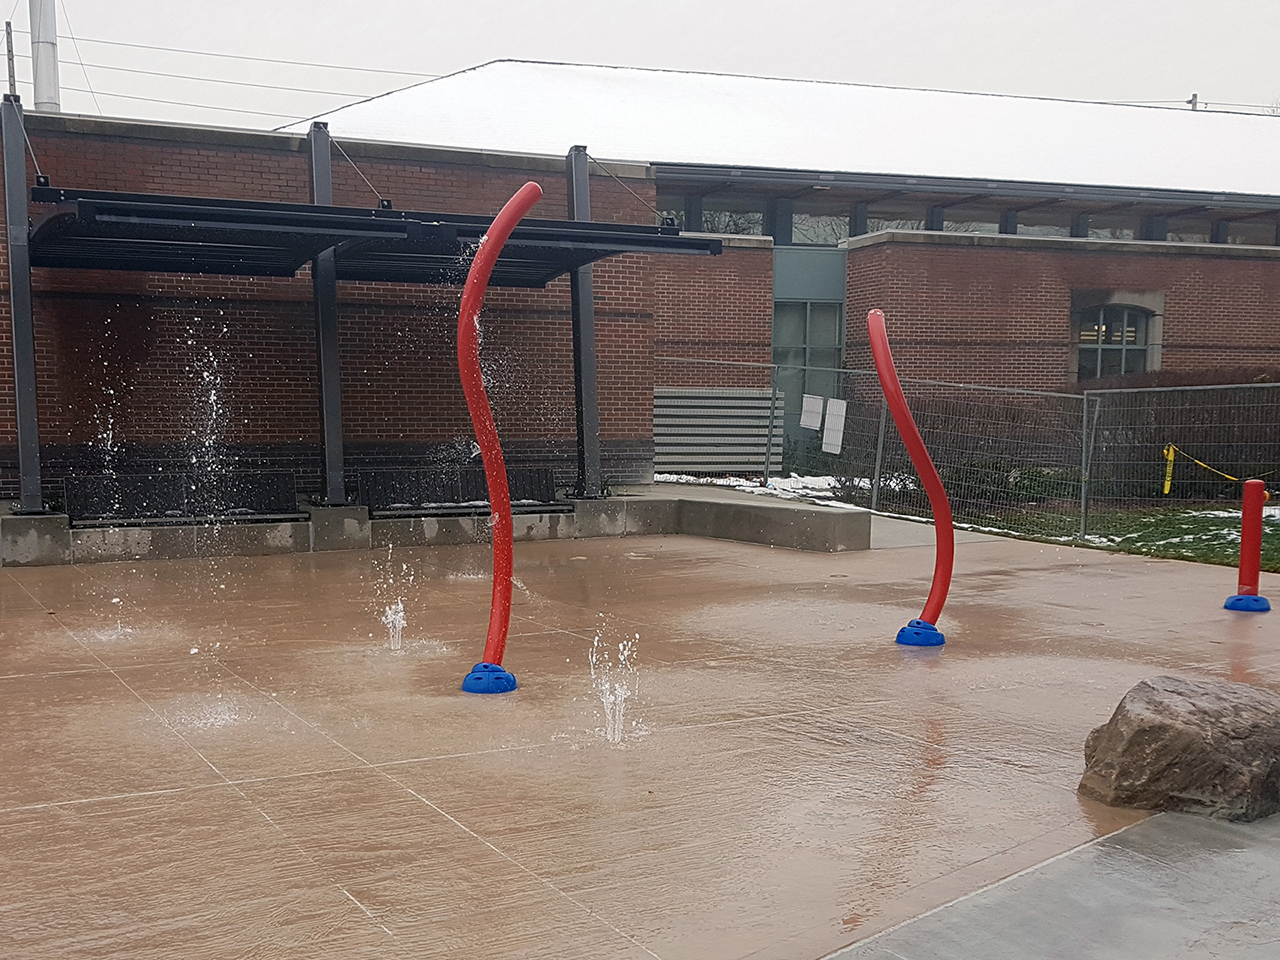 New splash pad being tested prior to opening. Image shows red vertical spray features and ground geysers shooting water.